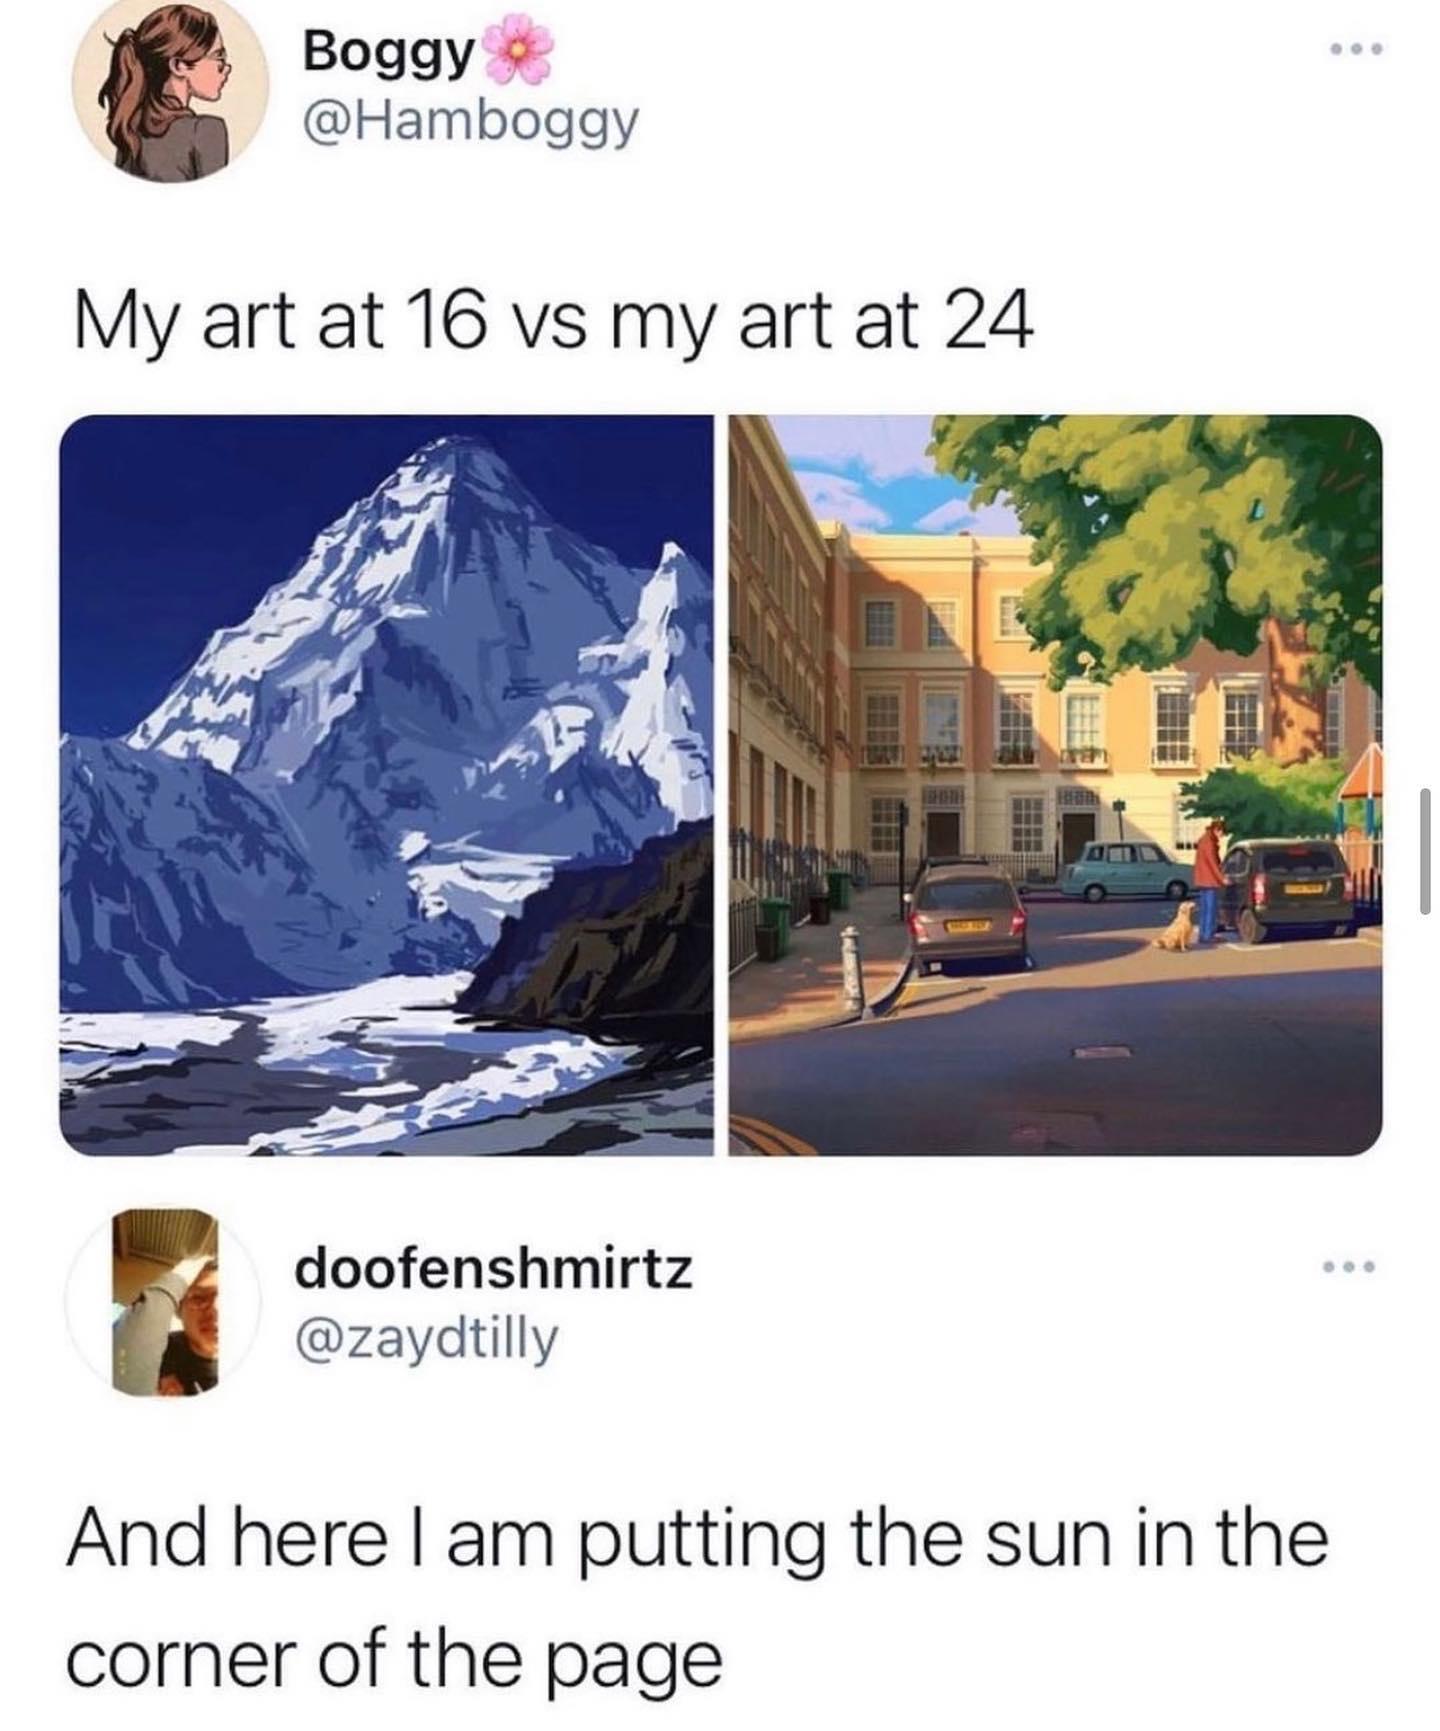 savage tweets of the week - tourism - Boggy My art at 16 vs my art at 24 doofenshmirtz And here I am putting the sun in the corner of the page